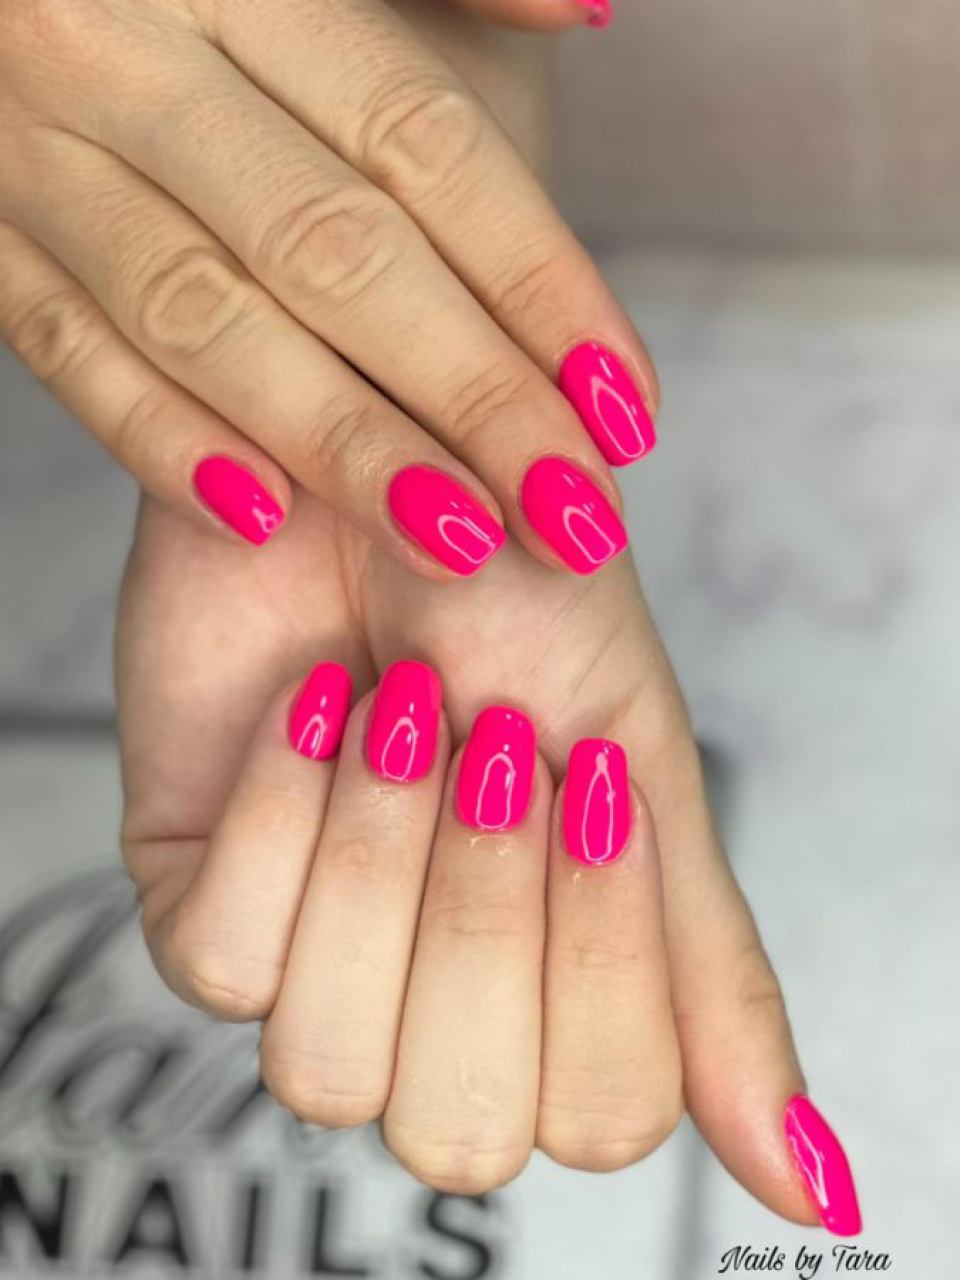 Gel nails or extensions